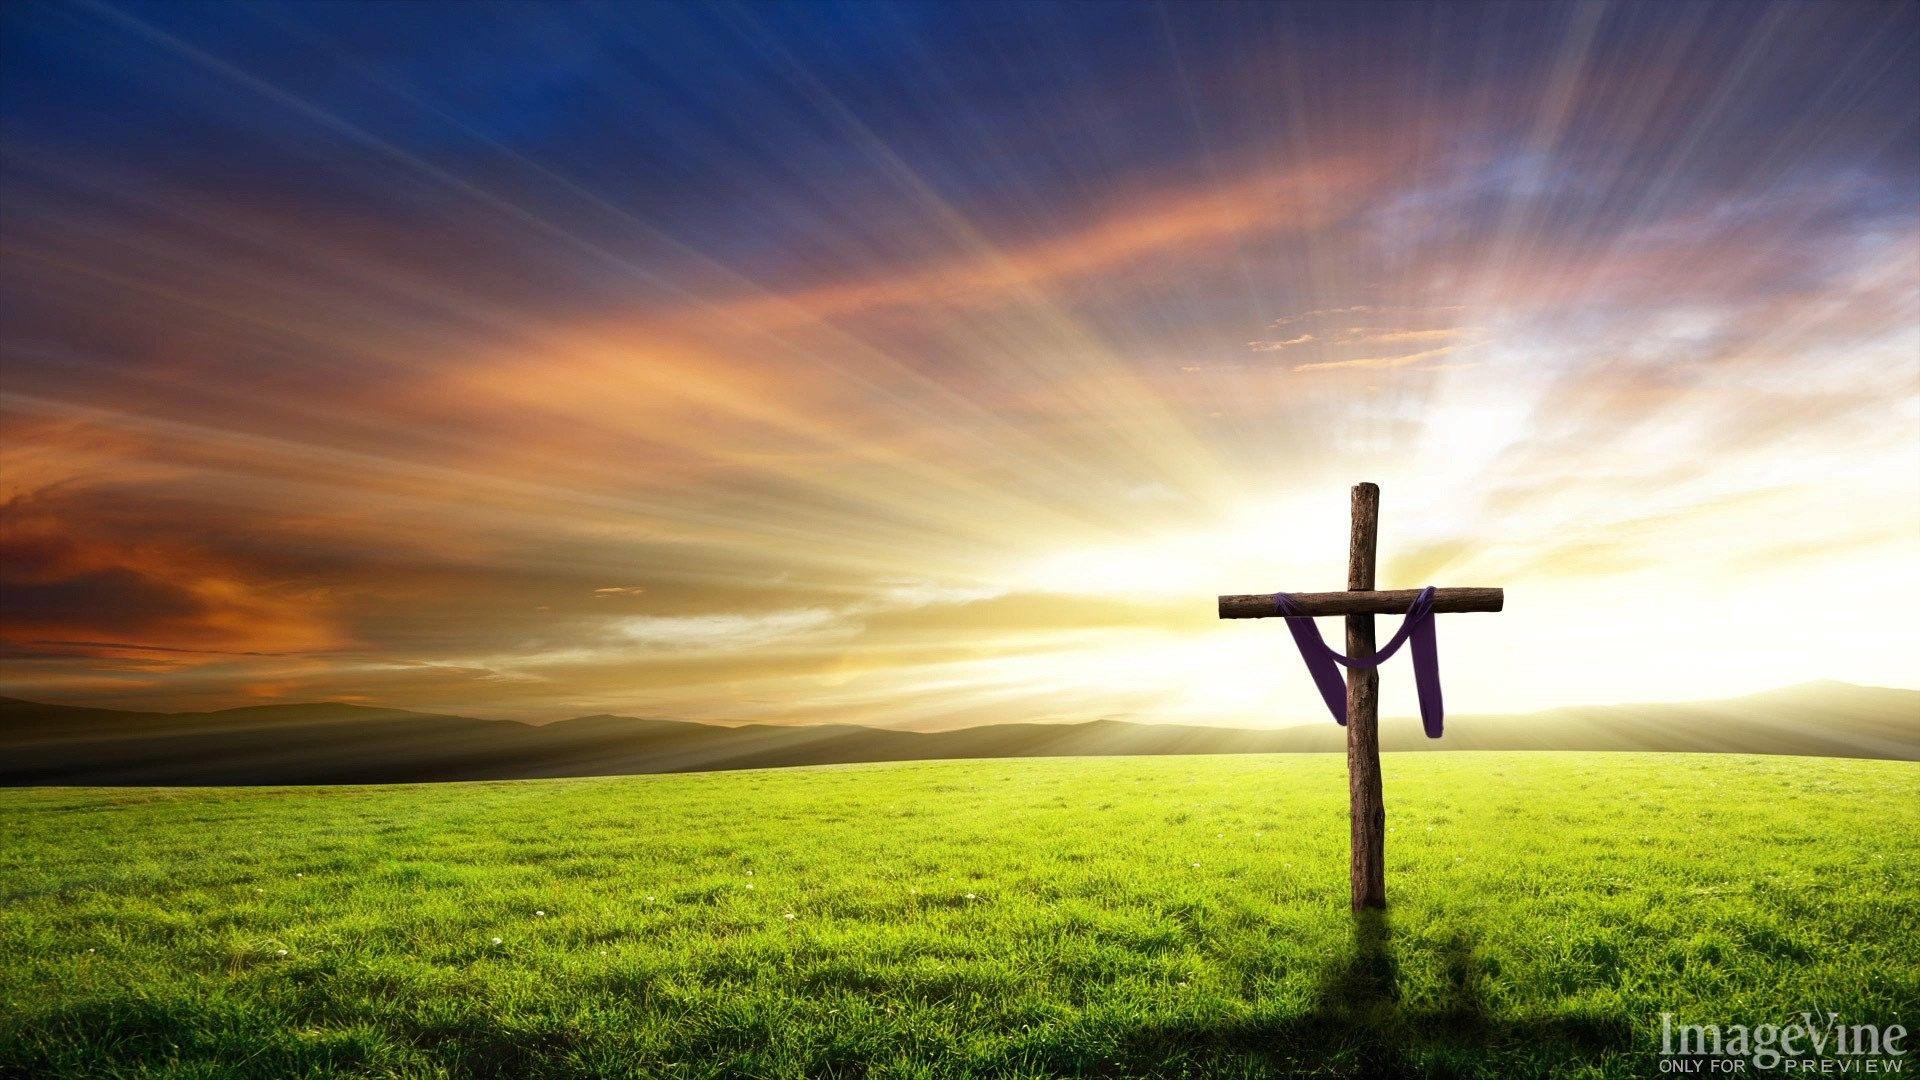 Religious Easter Images Browse 241538 Stock Photos  Vectors Free  Download with Trial  Shutterstock